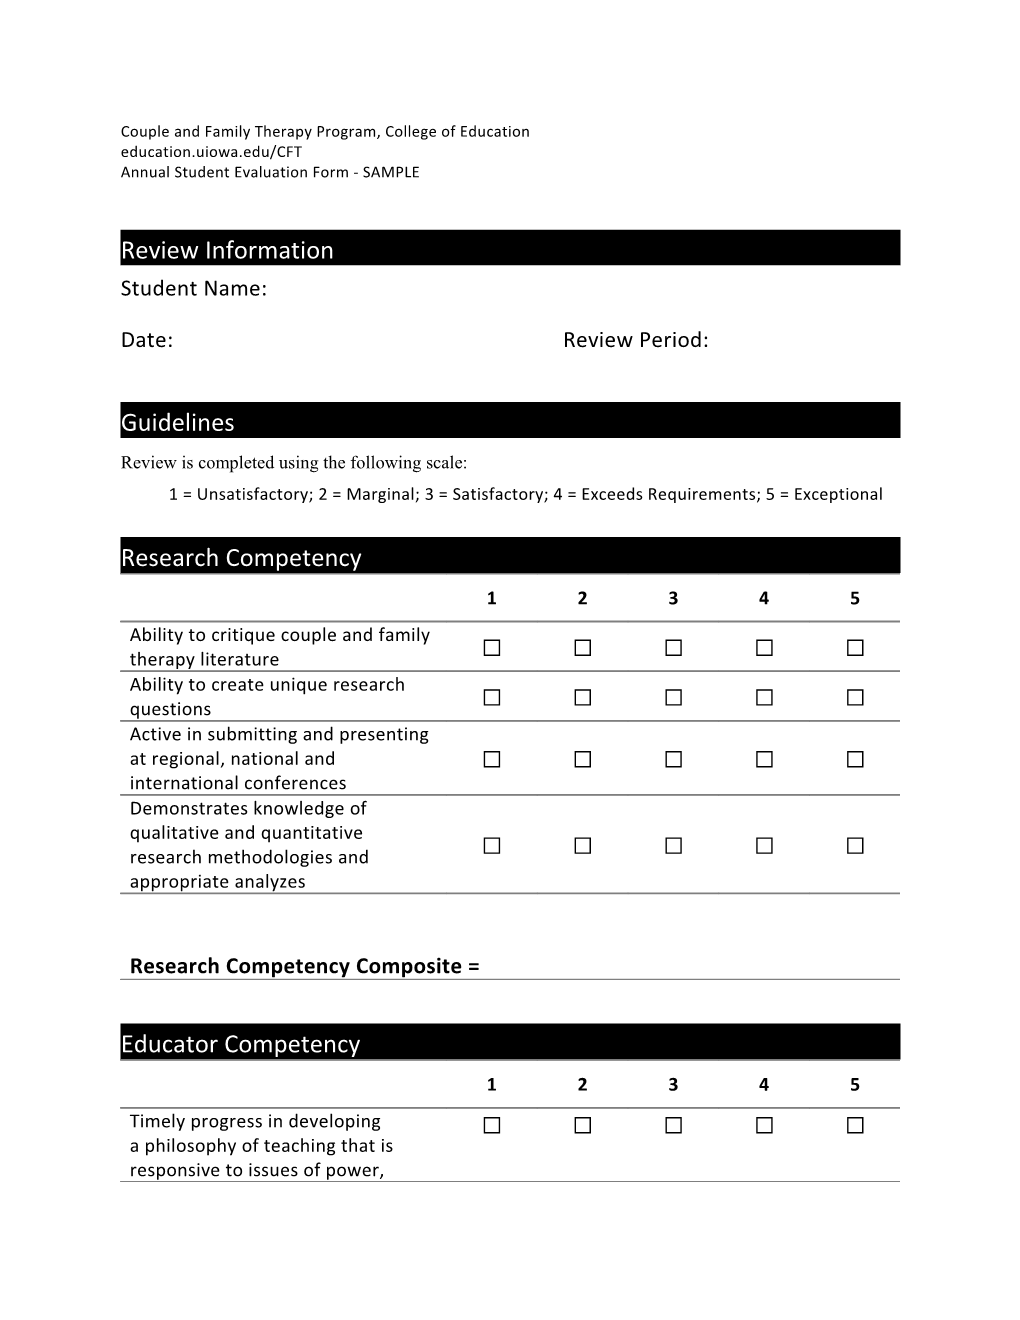 Annual Student Evaluation Form - SAMPLE